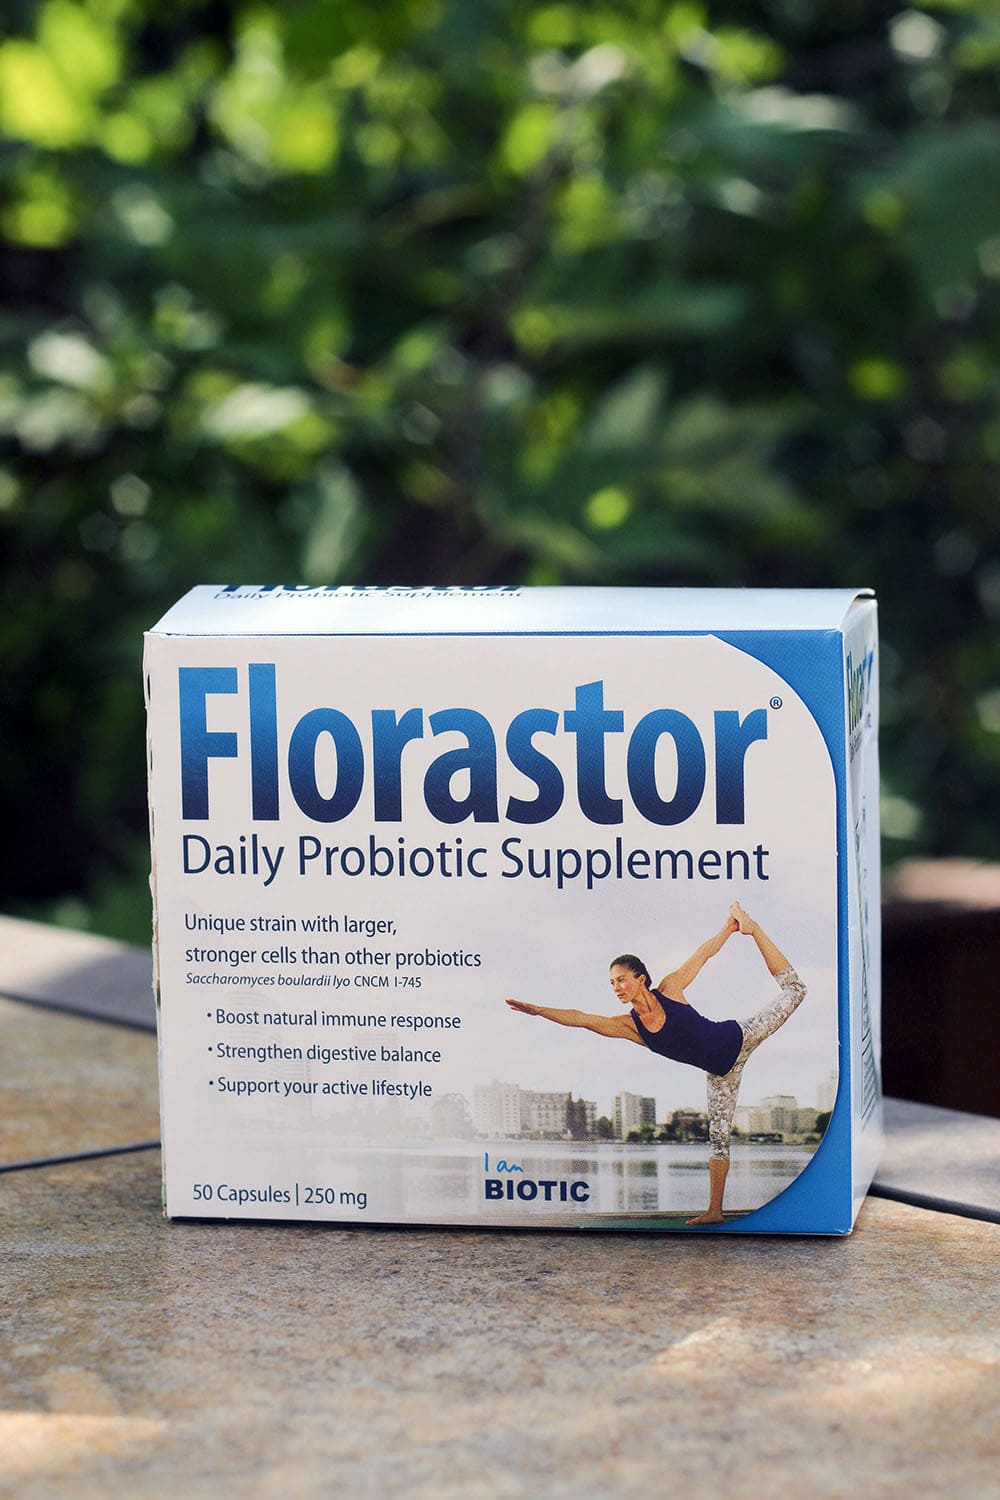 Florastor daily probiotic supplement - did you know they help break down carbs and fiber?